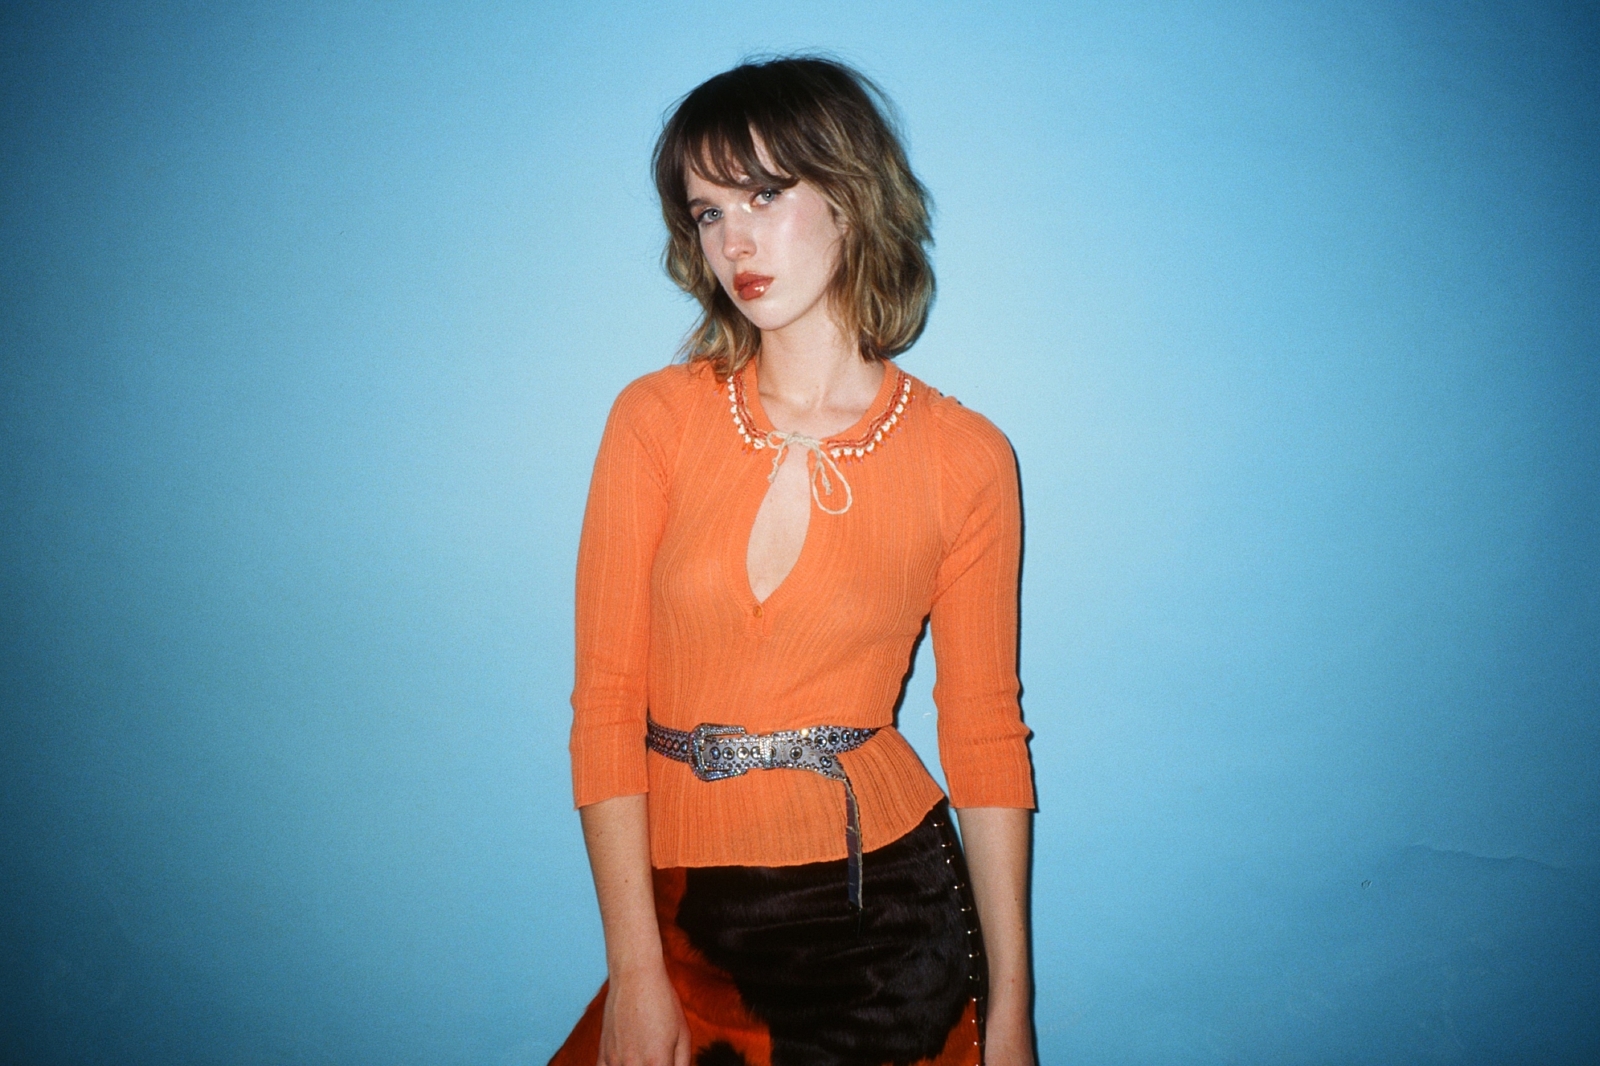 Molly Payton offers up new track 'Ruins'